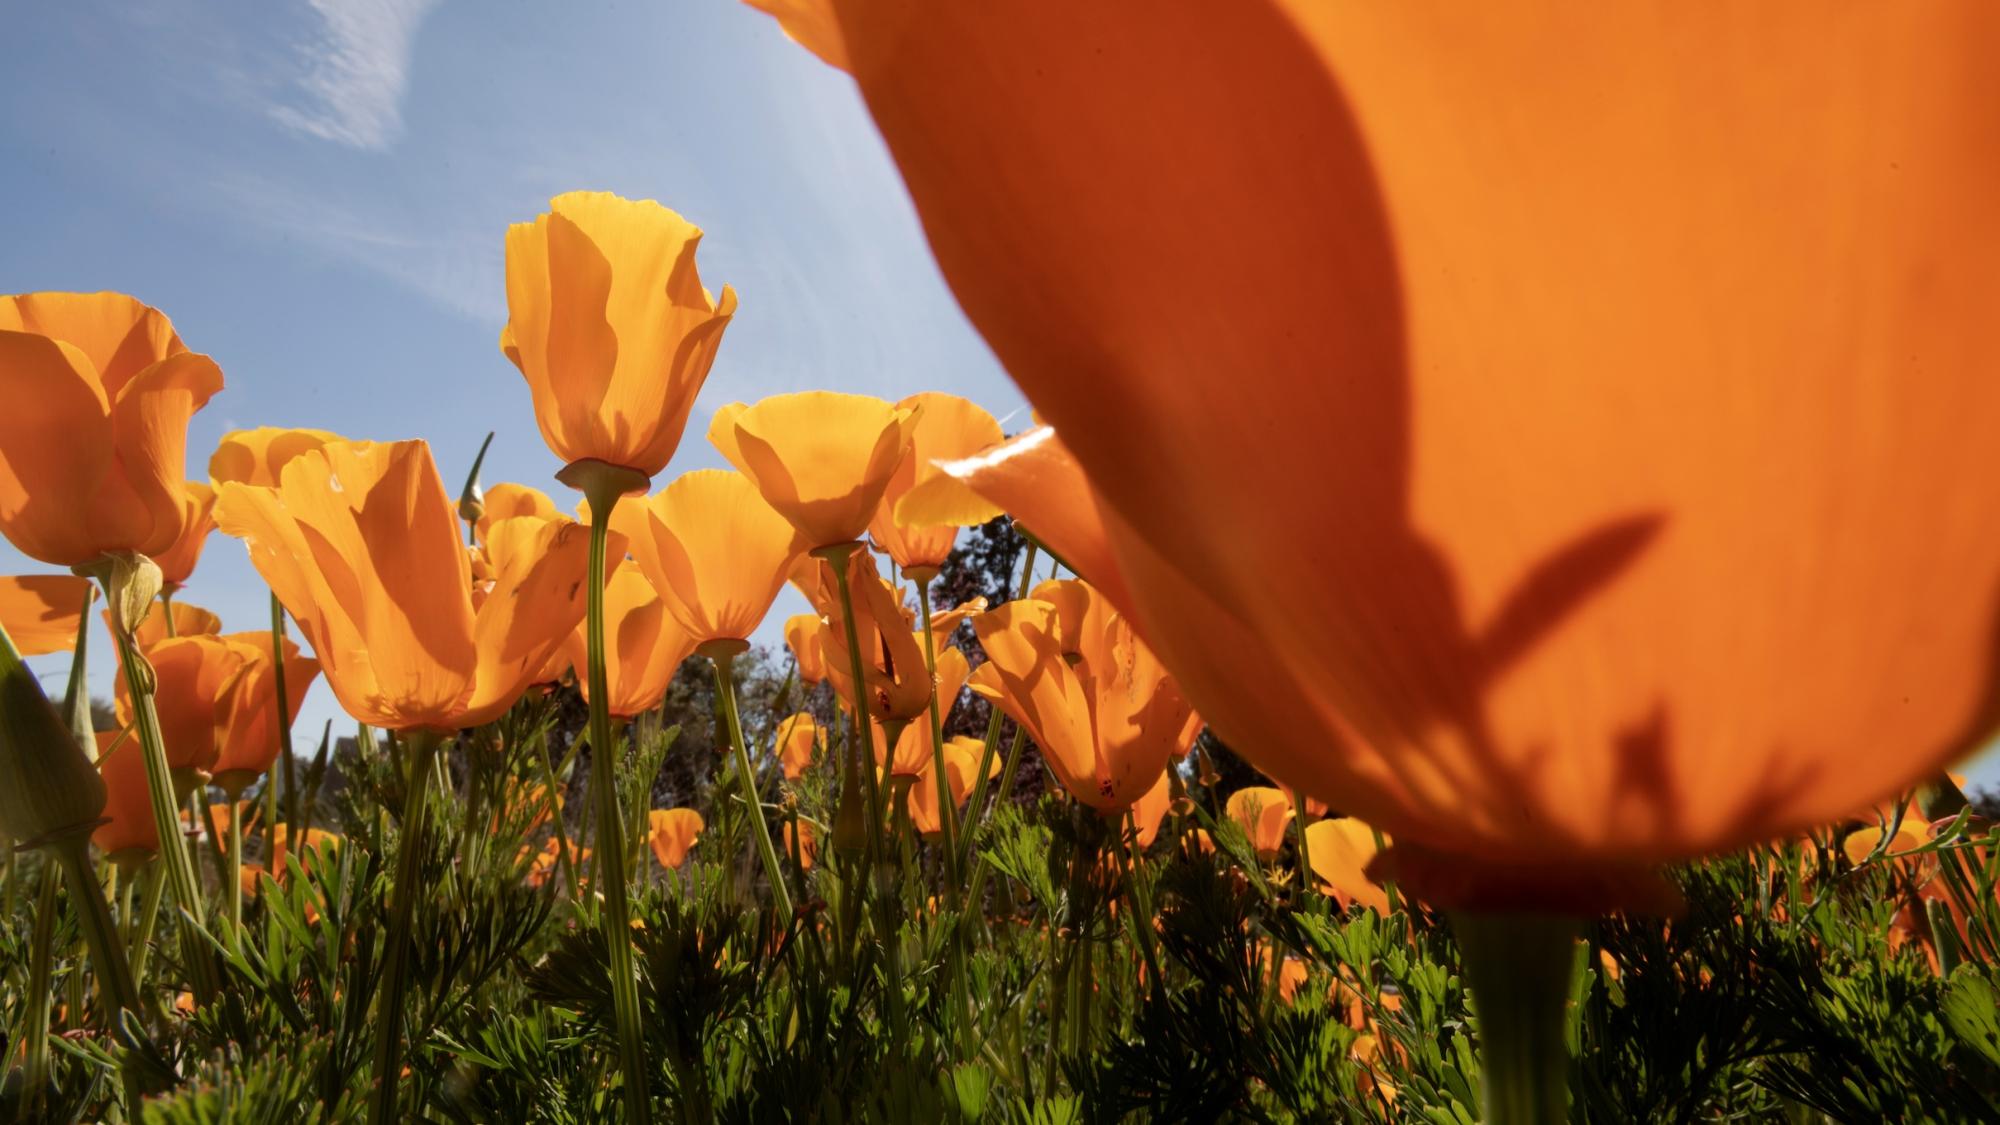 California poppies are in bloom, showing thier shades of orange, in the Arboretum.